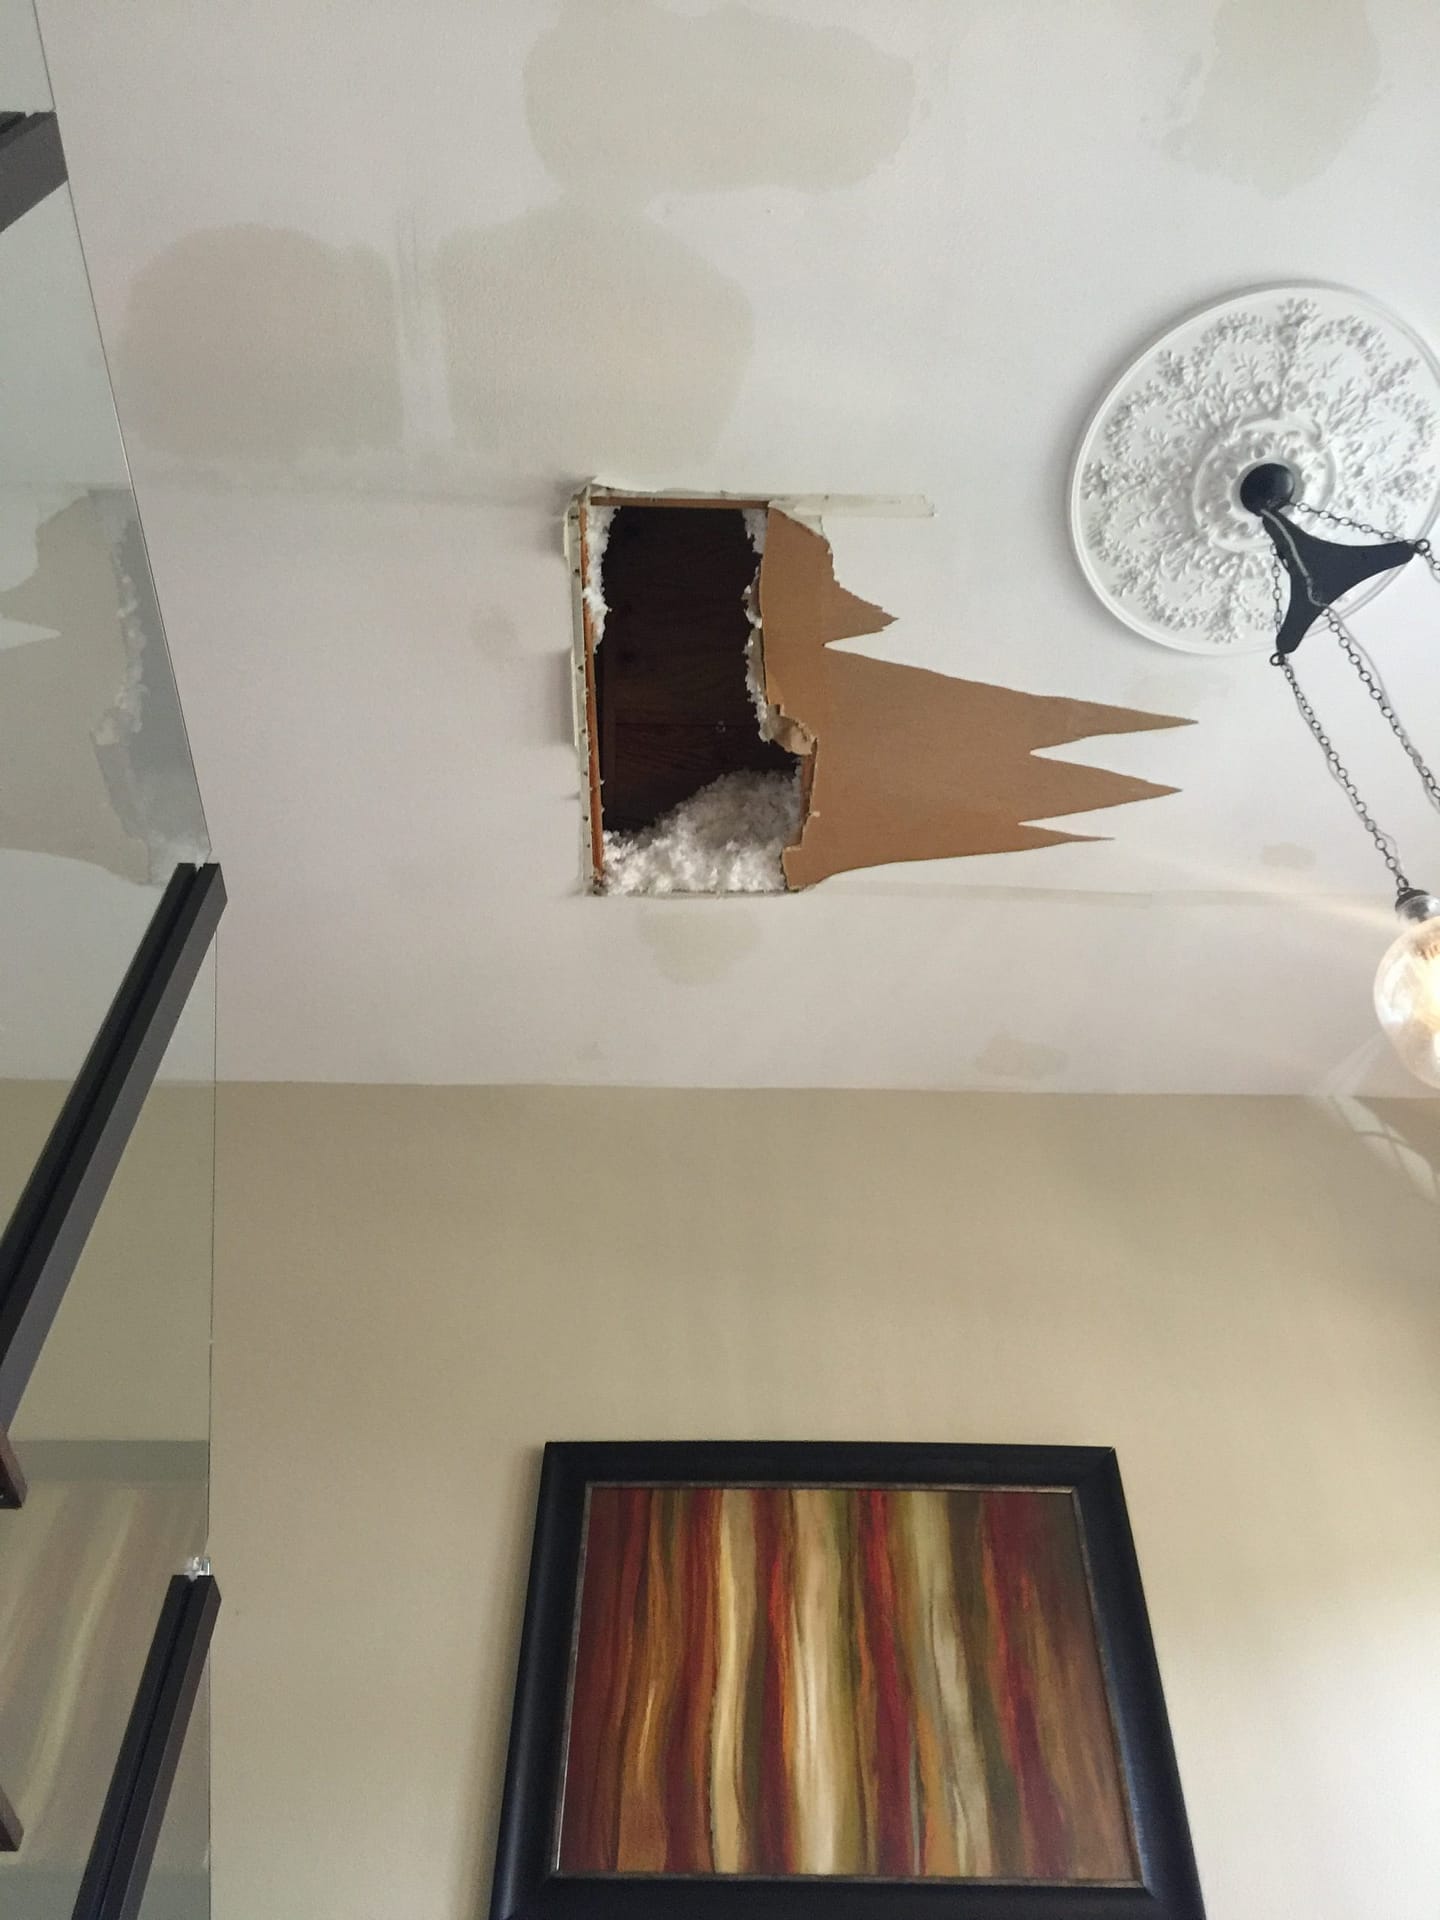 Hole in the ceiling after roof leaked 